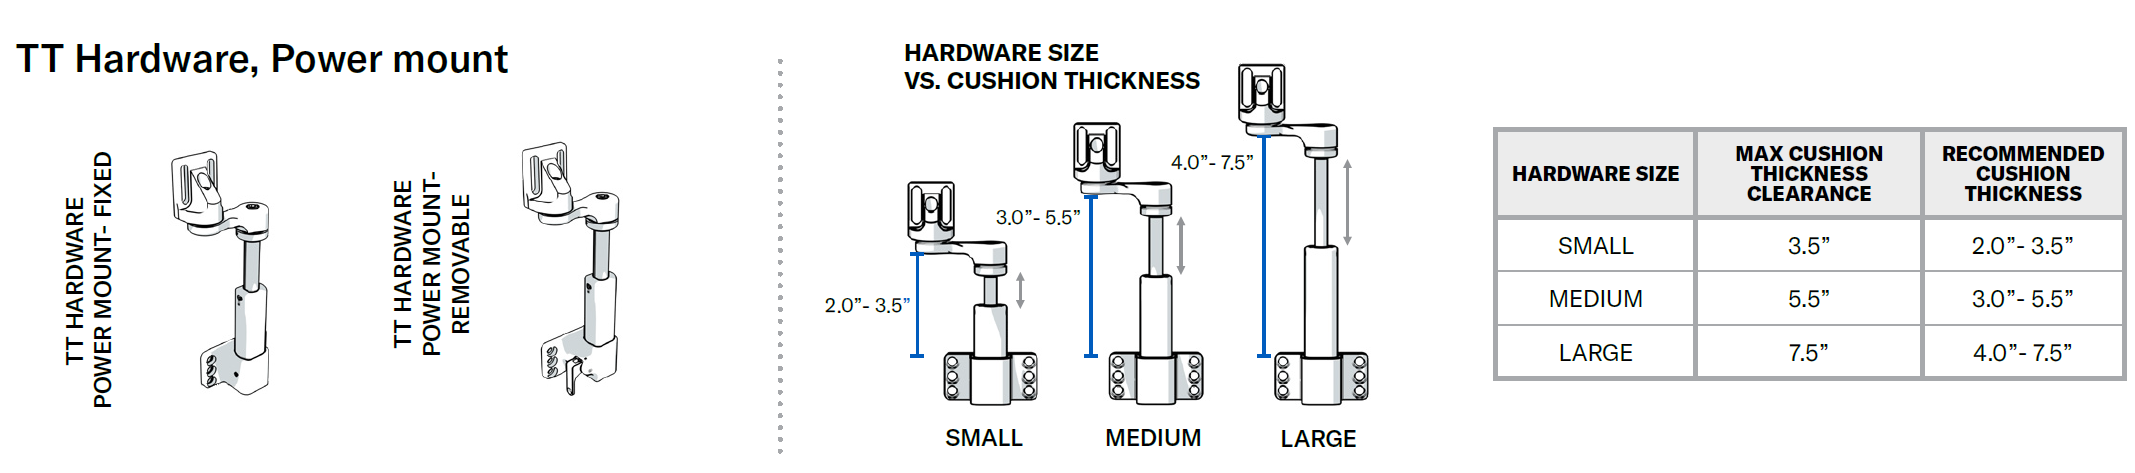 https://www.comfortcompany.com/images/form_images/custom/cushion/inception/7_3_B_TT_Hardware_Power_Mount_Hardware_Size_vs_Cushion_Thickness.png